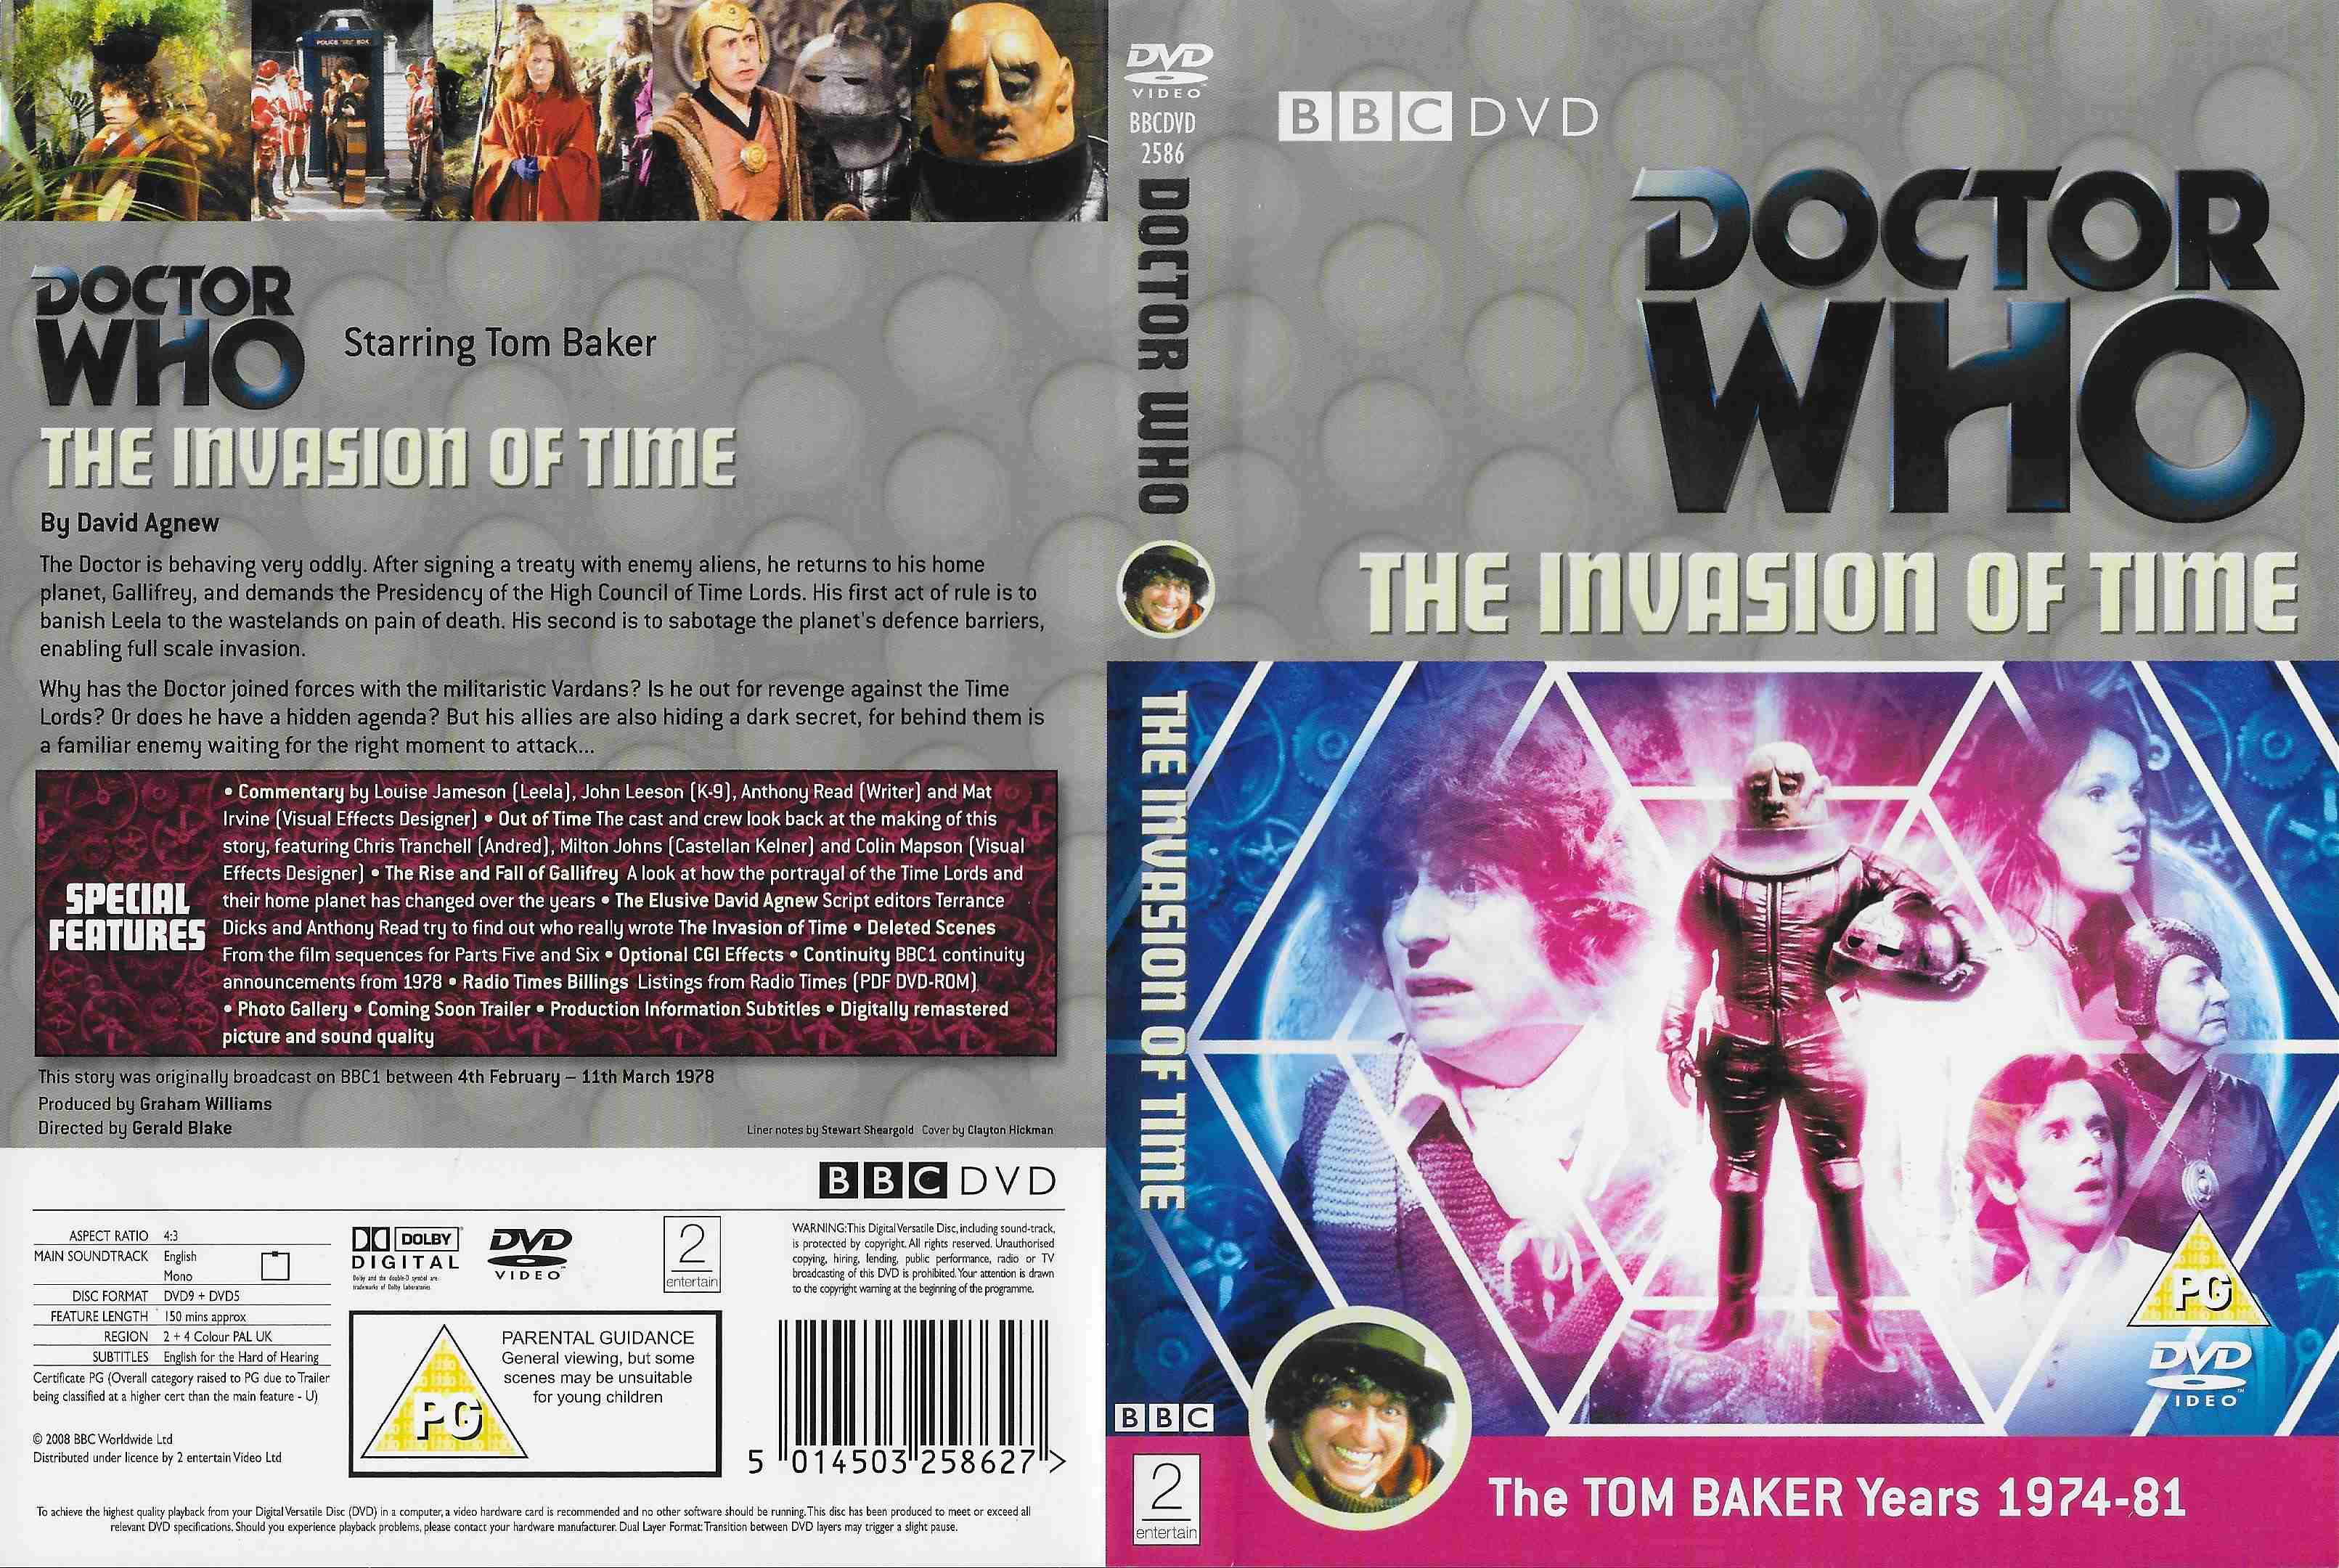 Picture of BBCDVD 2586 Doctor Who - The invasion of time by artist David Agnew from the BBC records and Tapes library